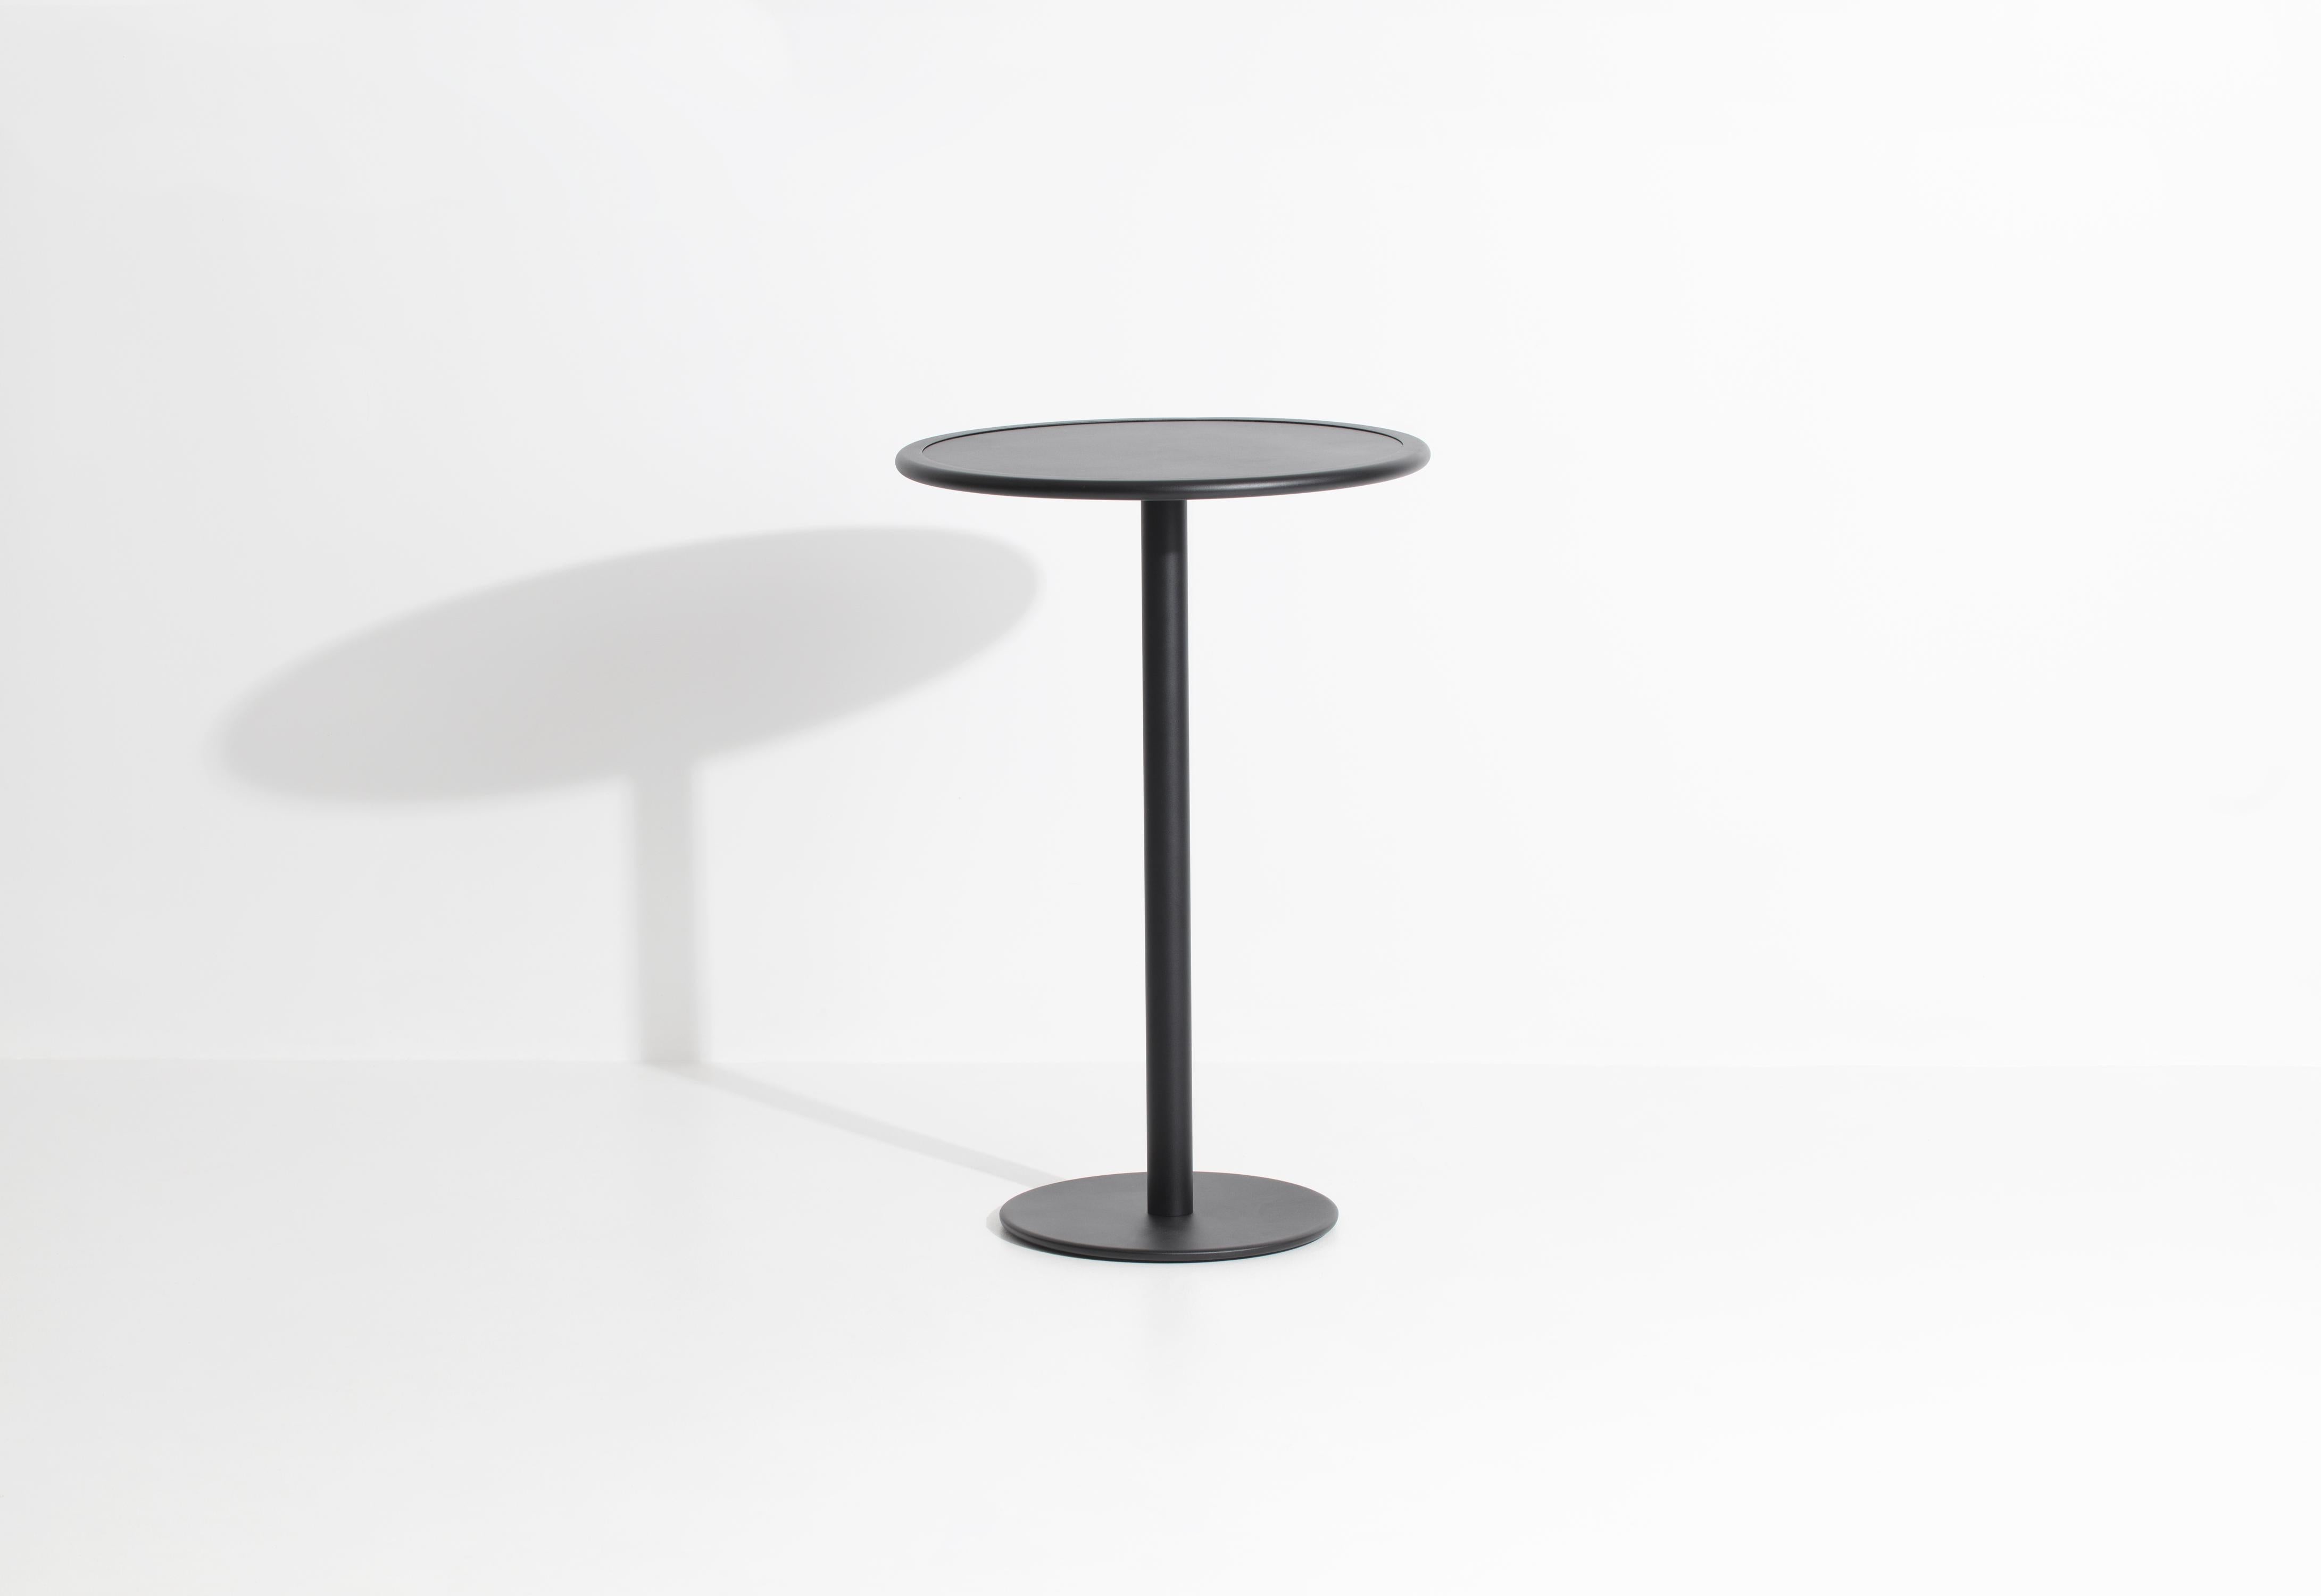 Petite Friture Week-End Round High Table in Black Aluminium by Studio BrichetZiegler, 2017

The week-end collection is a full range of outdoor furniture, in aluminium grained epoxy paint, matt finish, that includes 18 functions and 8 colours for